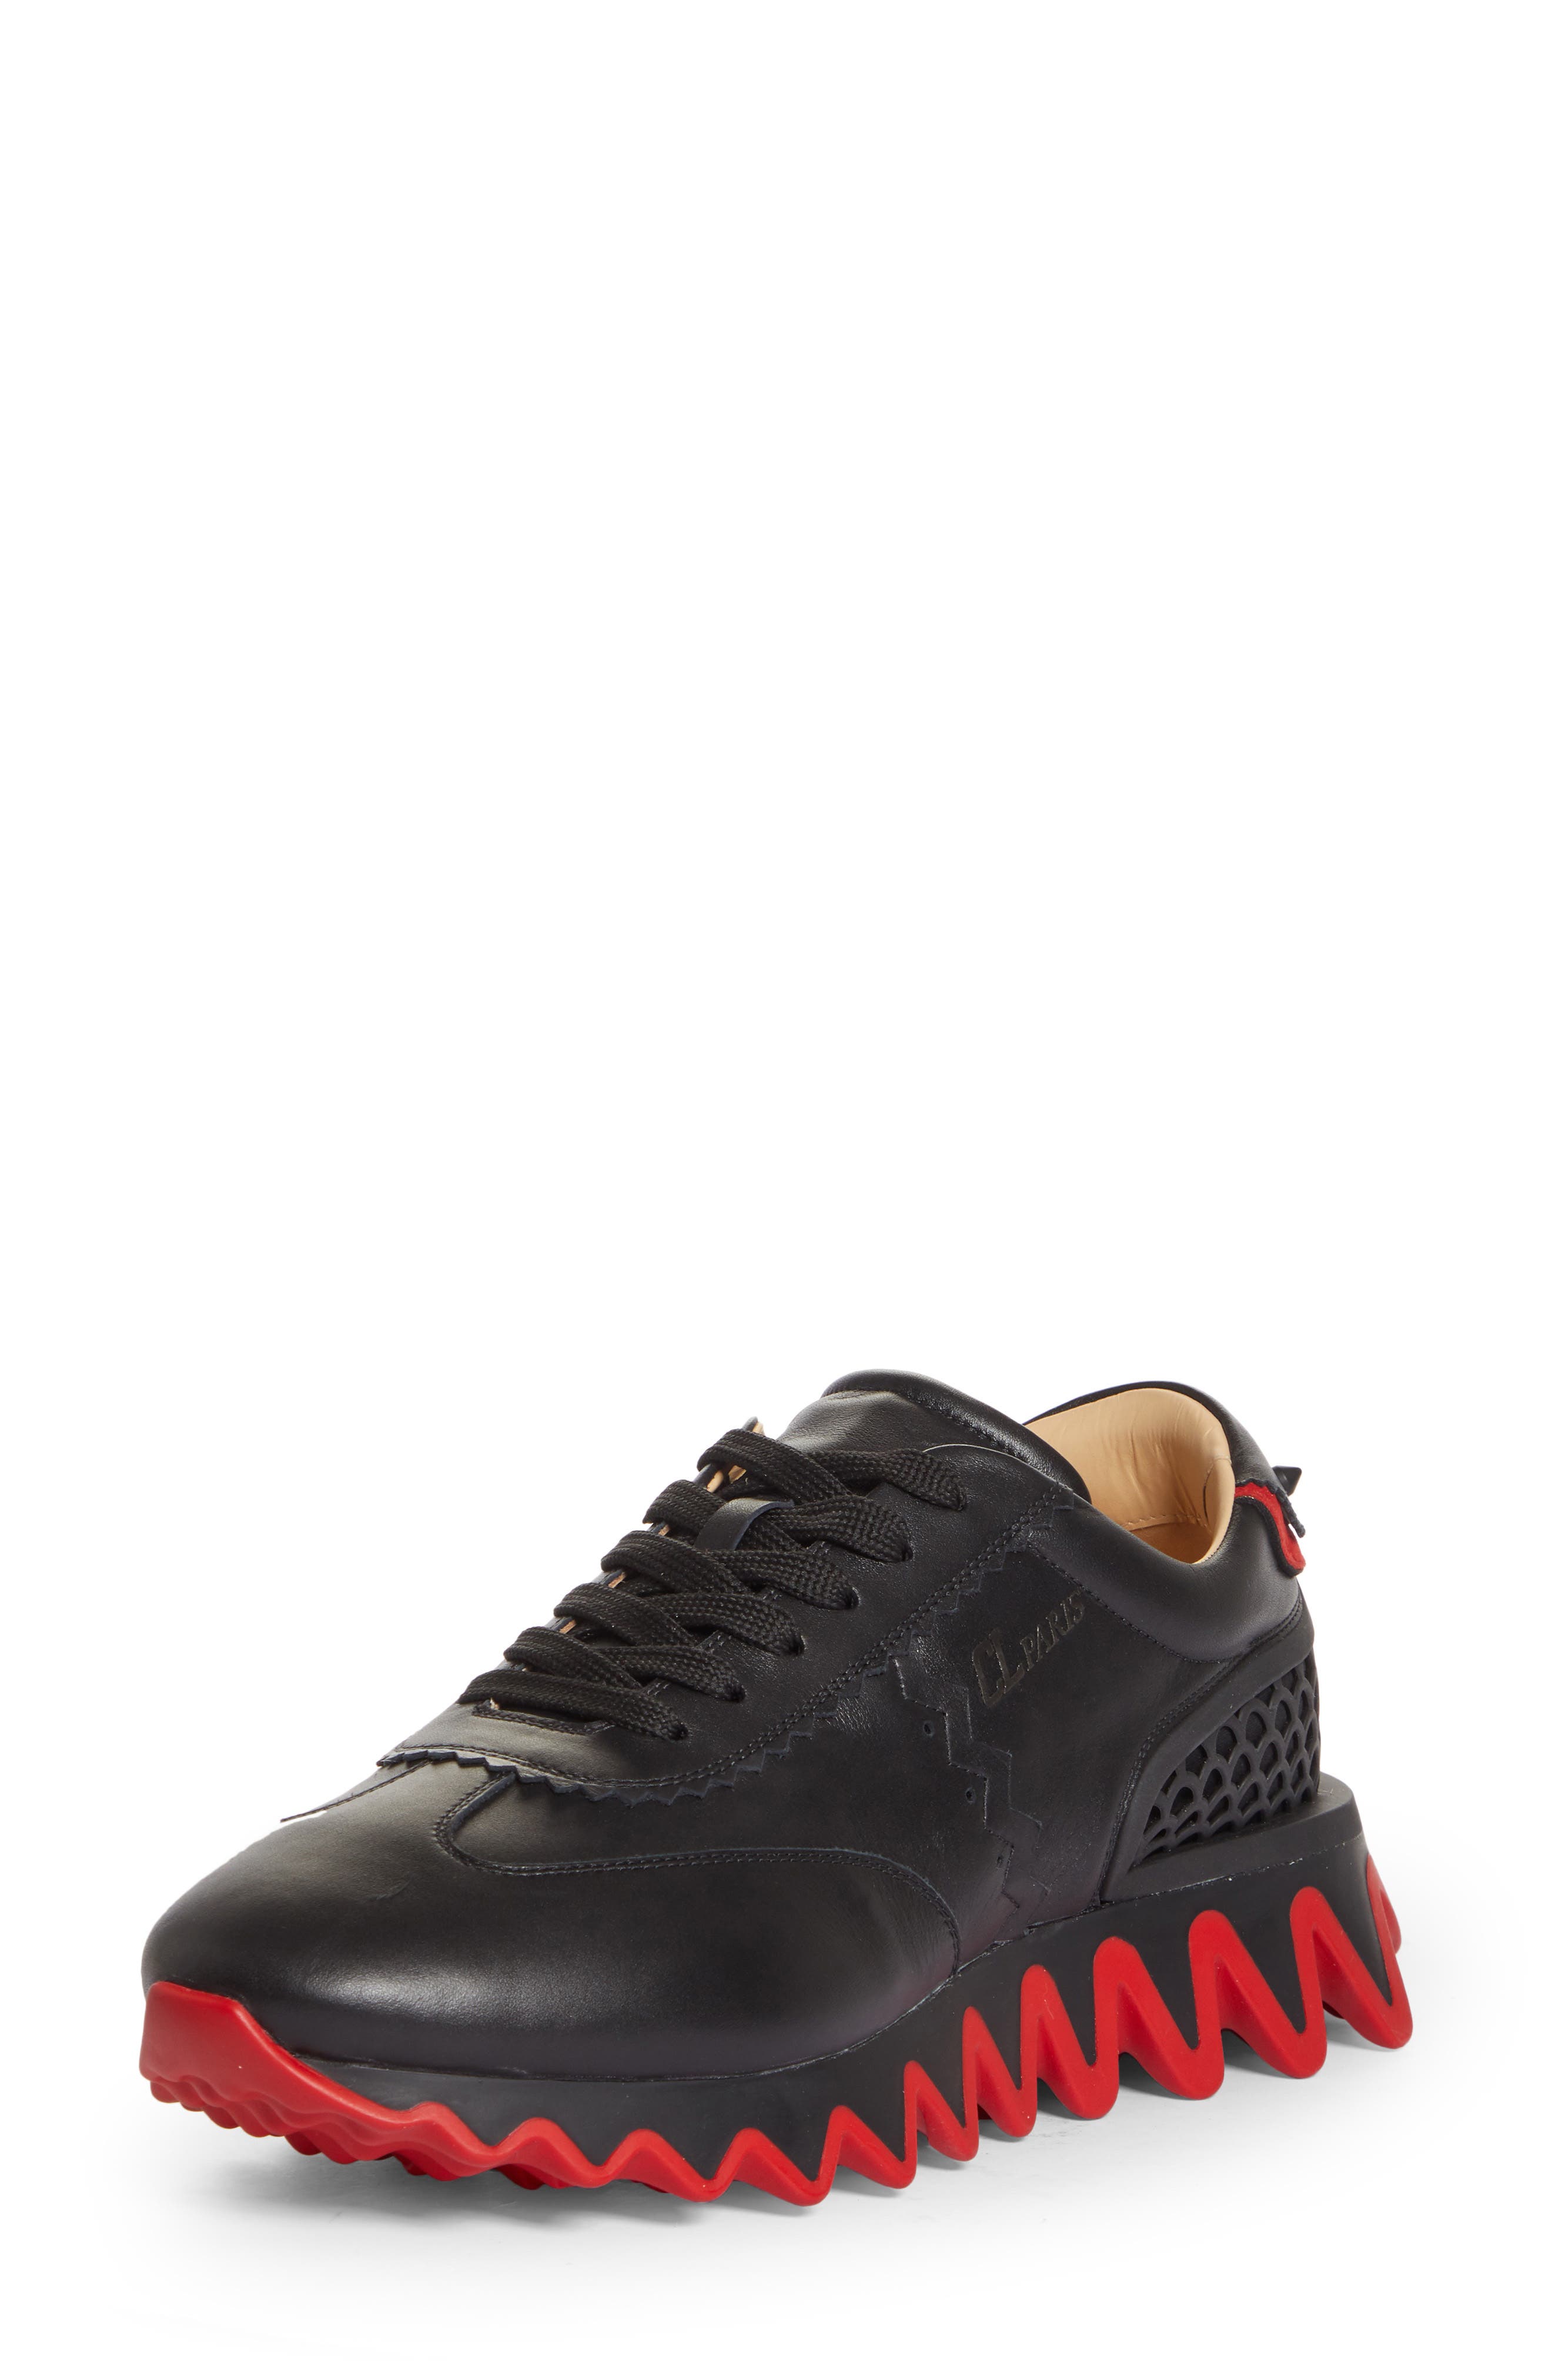 louboutin red bottom shoes for men